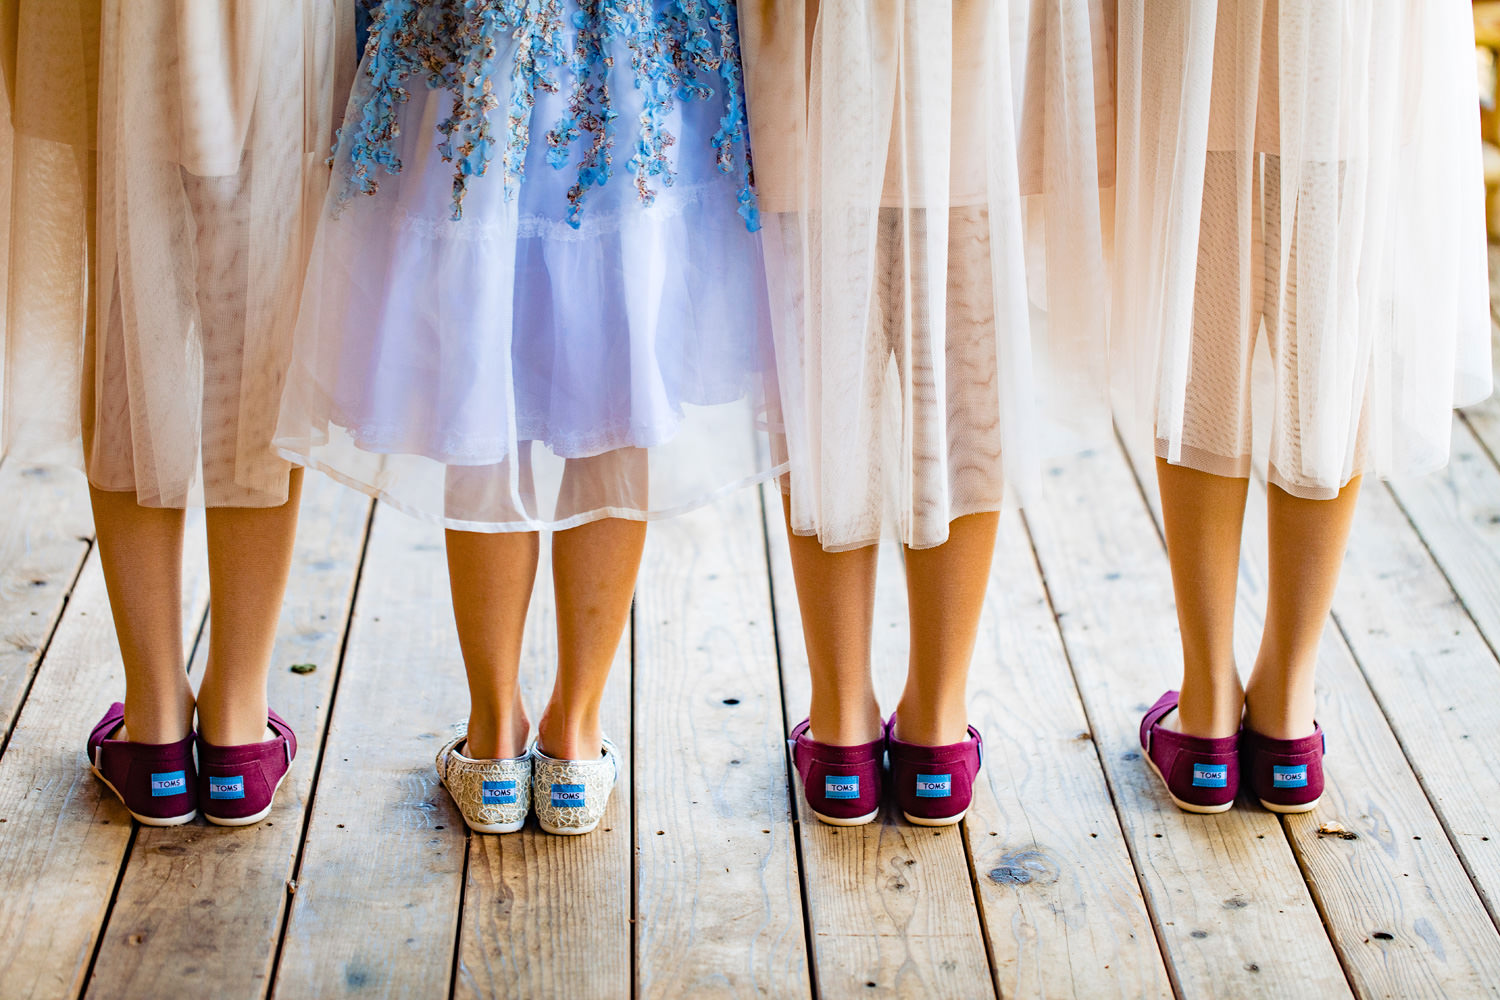 bridesmaids shoes ready for duty as captured by wild basin wedding photographer tomKphoto in allenspark, colorado